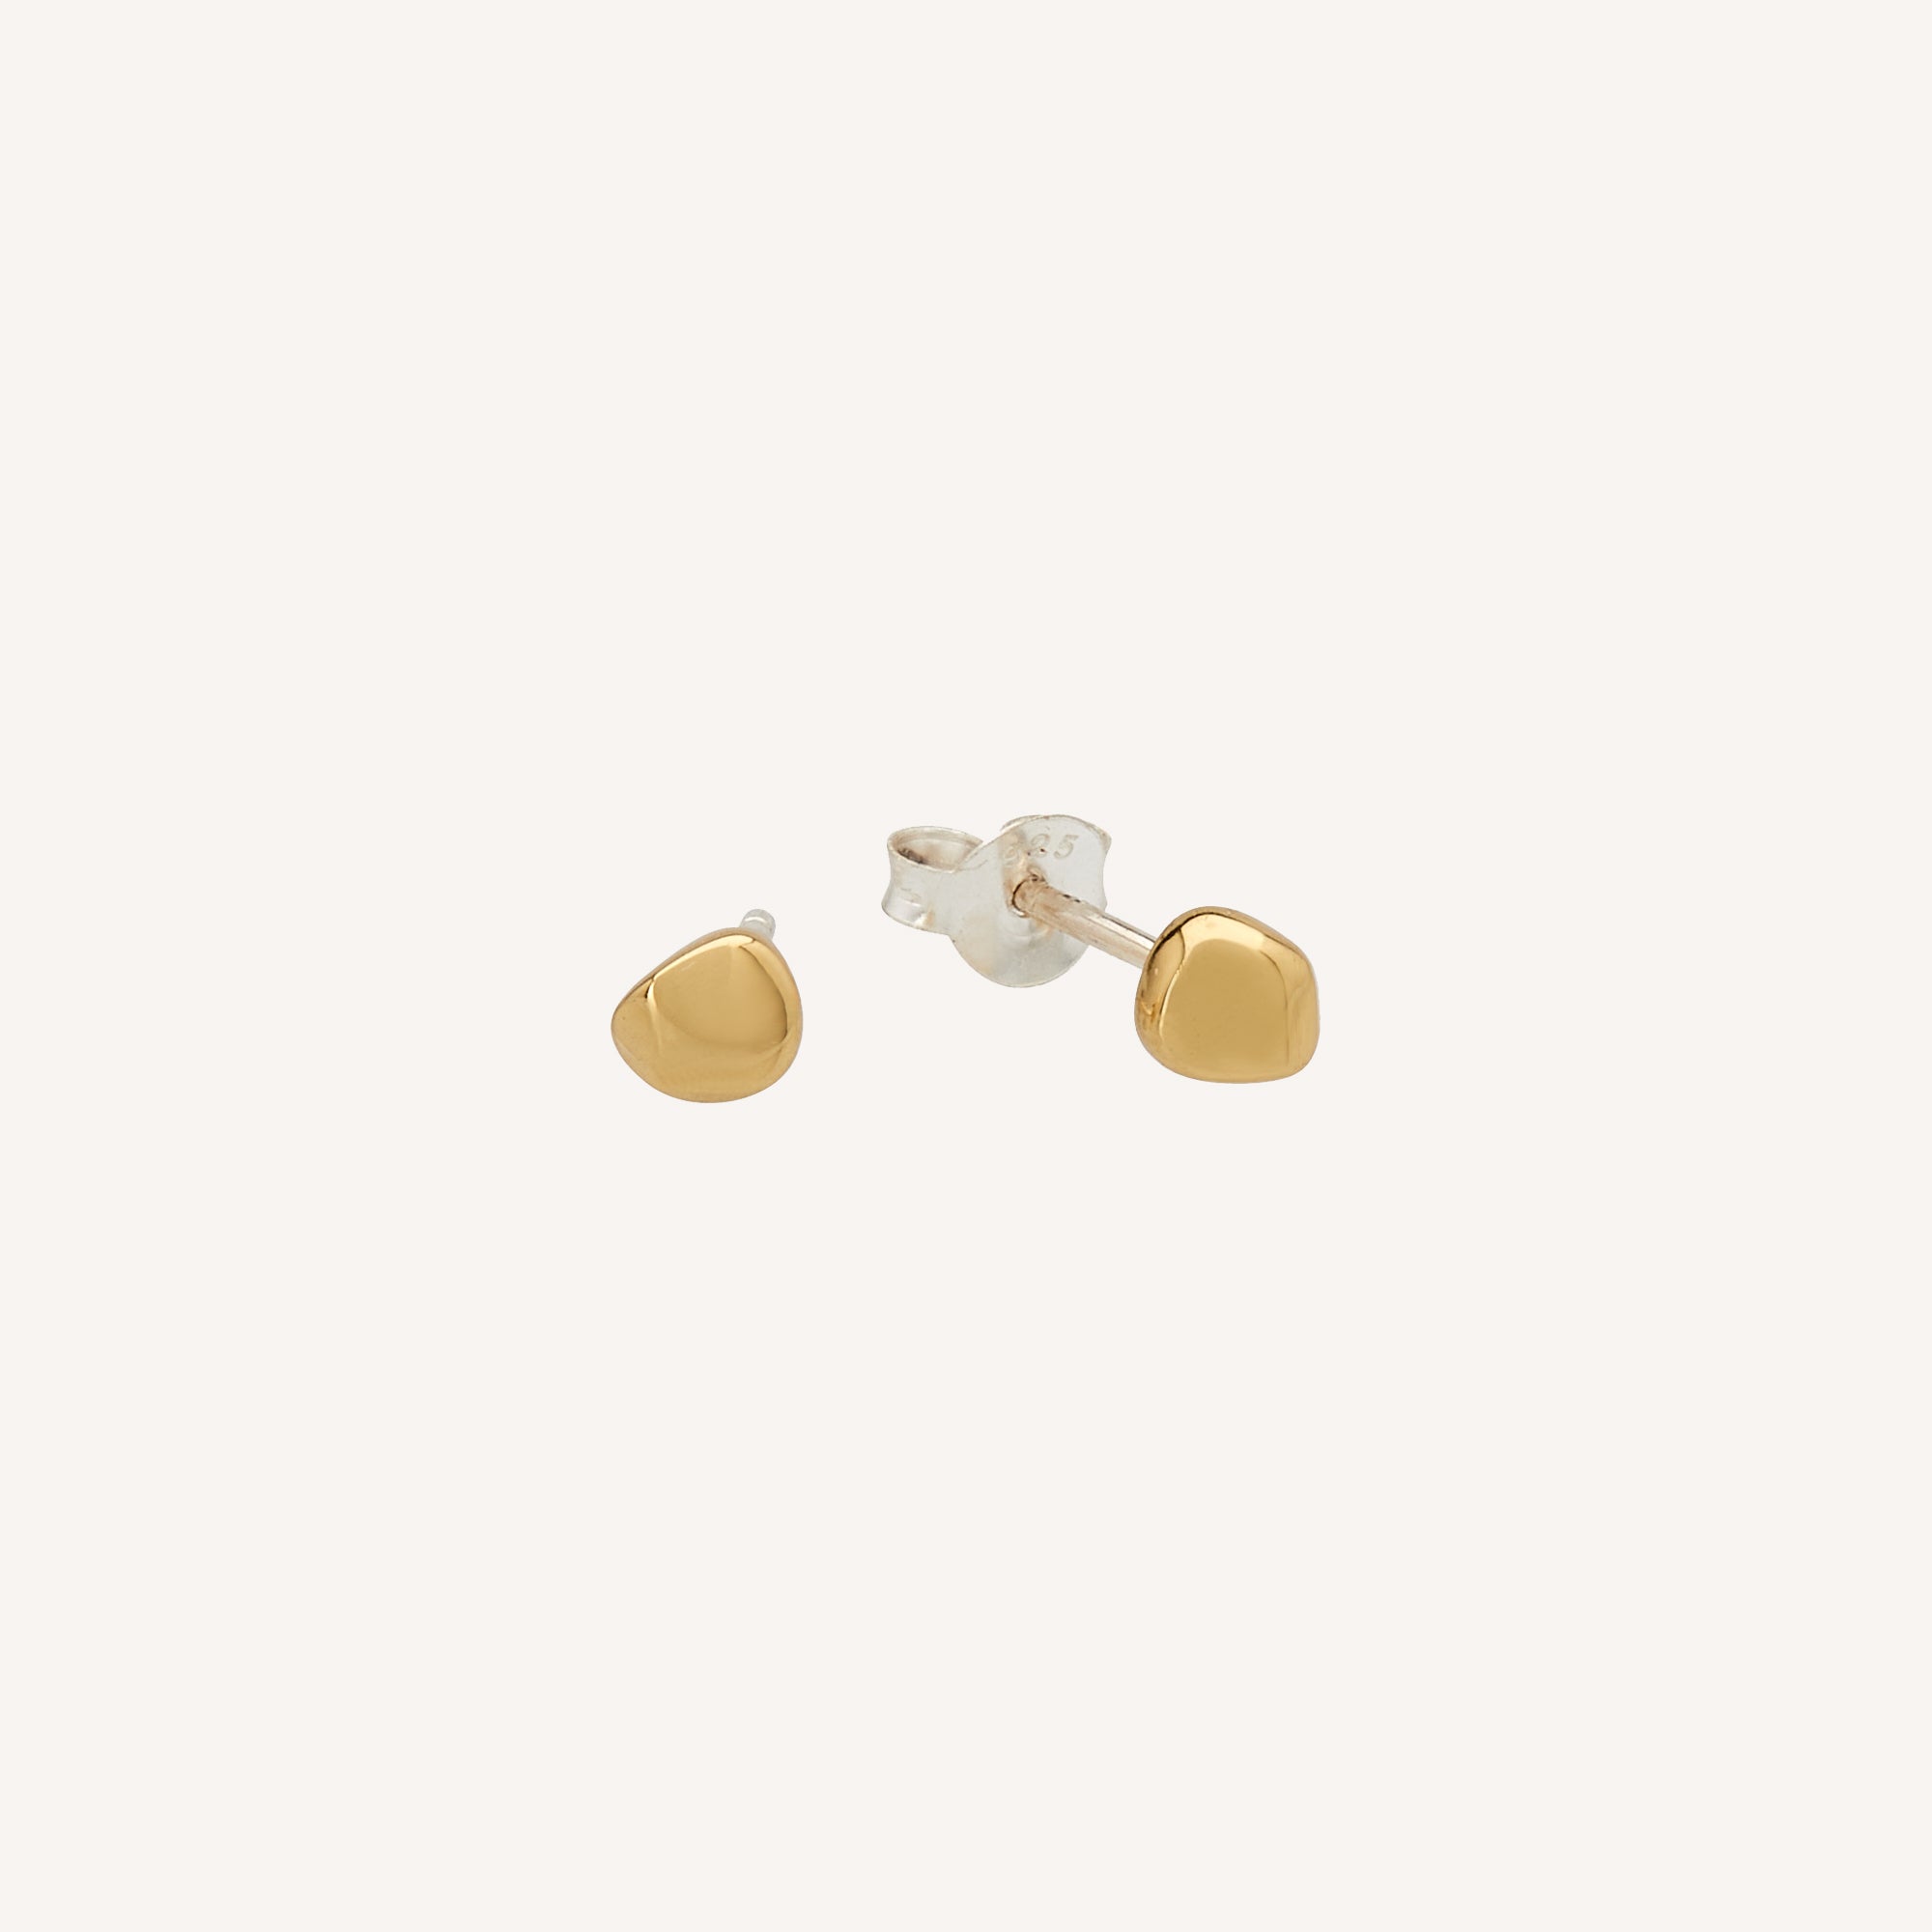 C.W. James pebble earrings gold plated brass